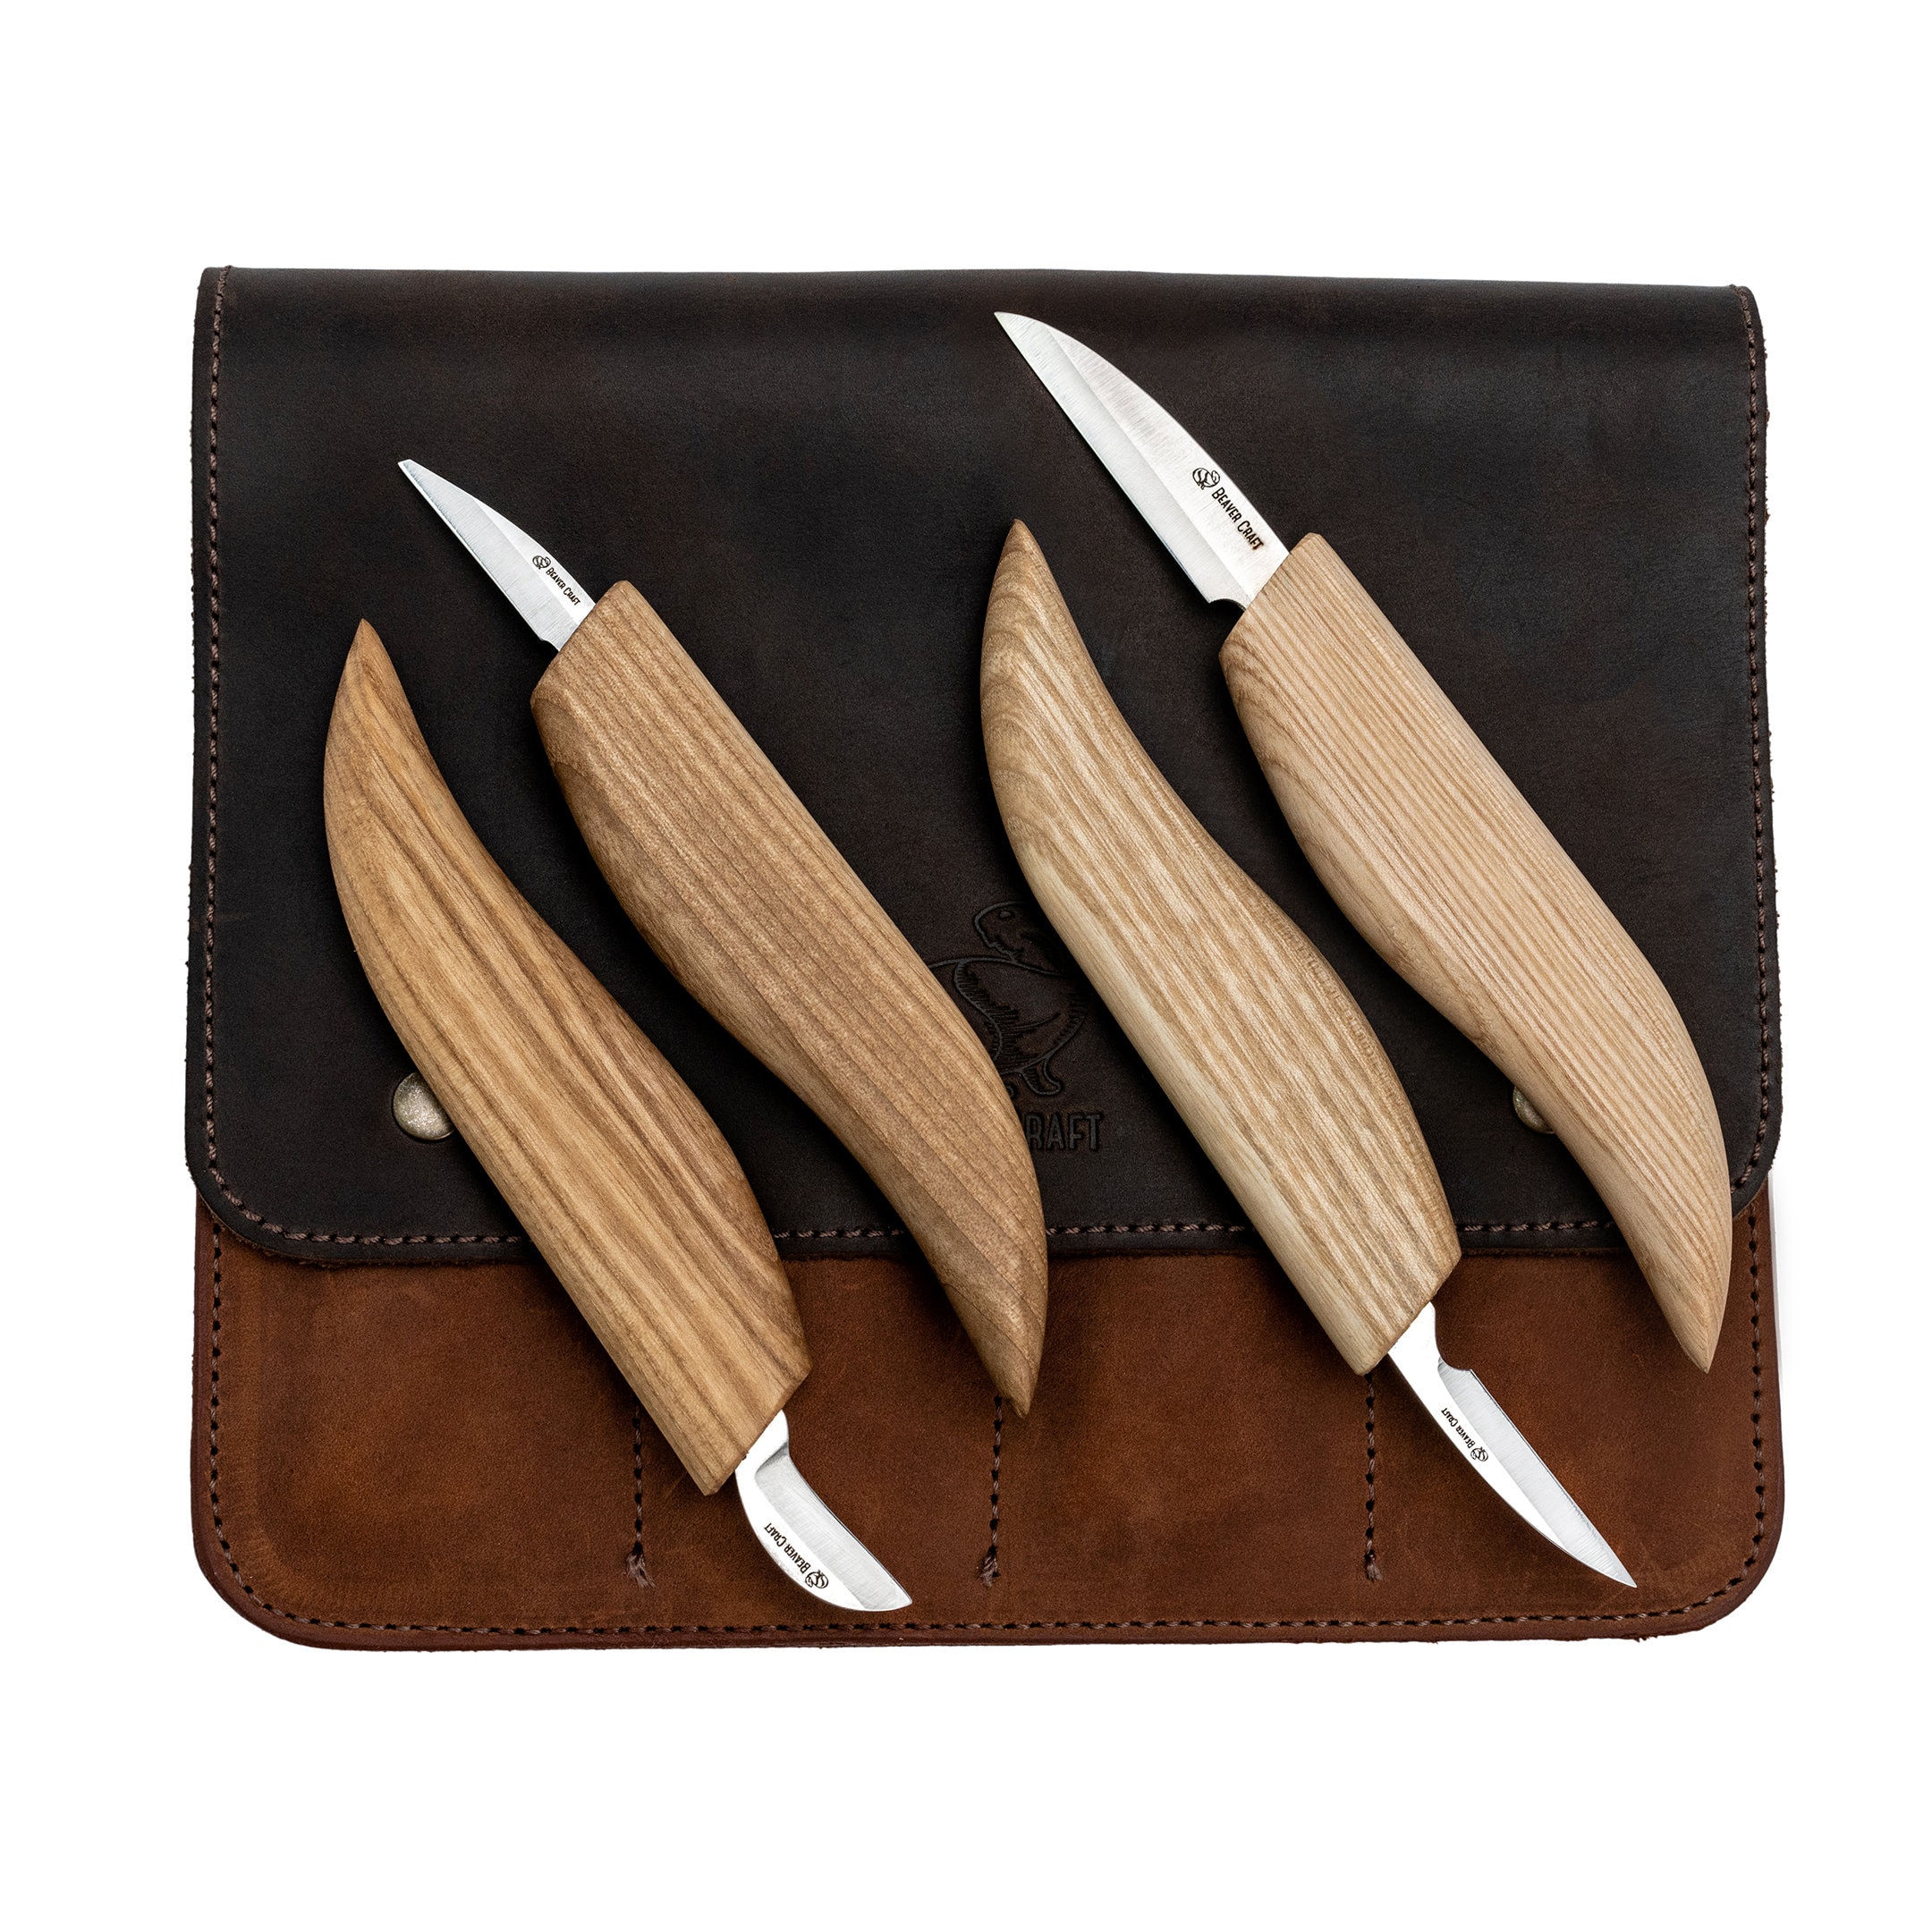 Buy SC05 book - Geometric Wood Carving Knives Set in a Book Case